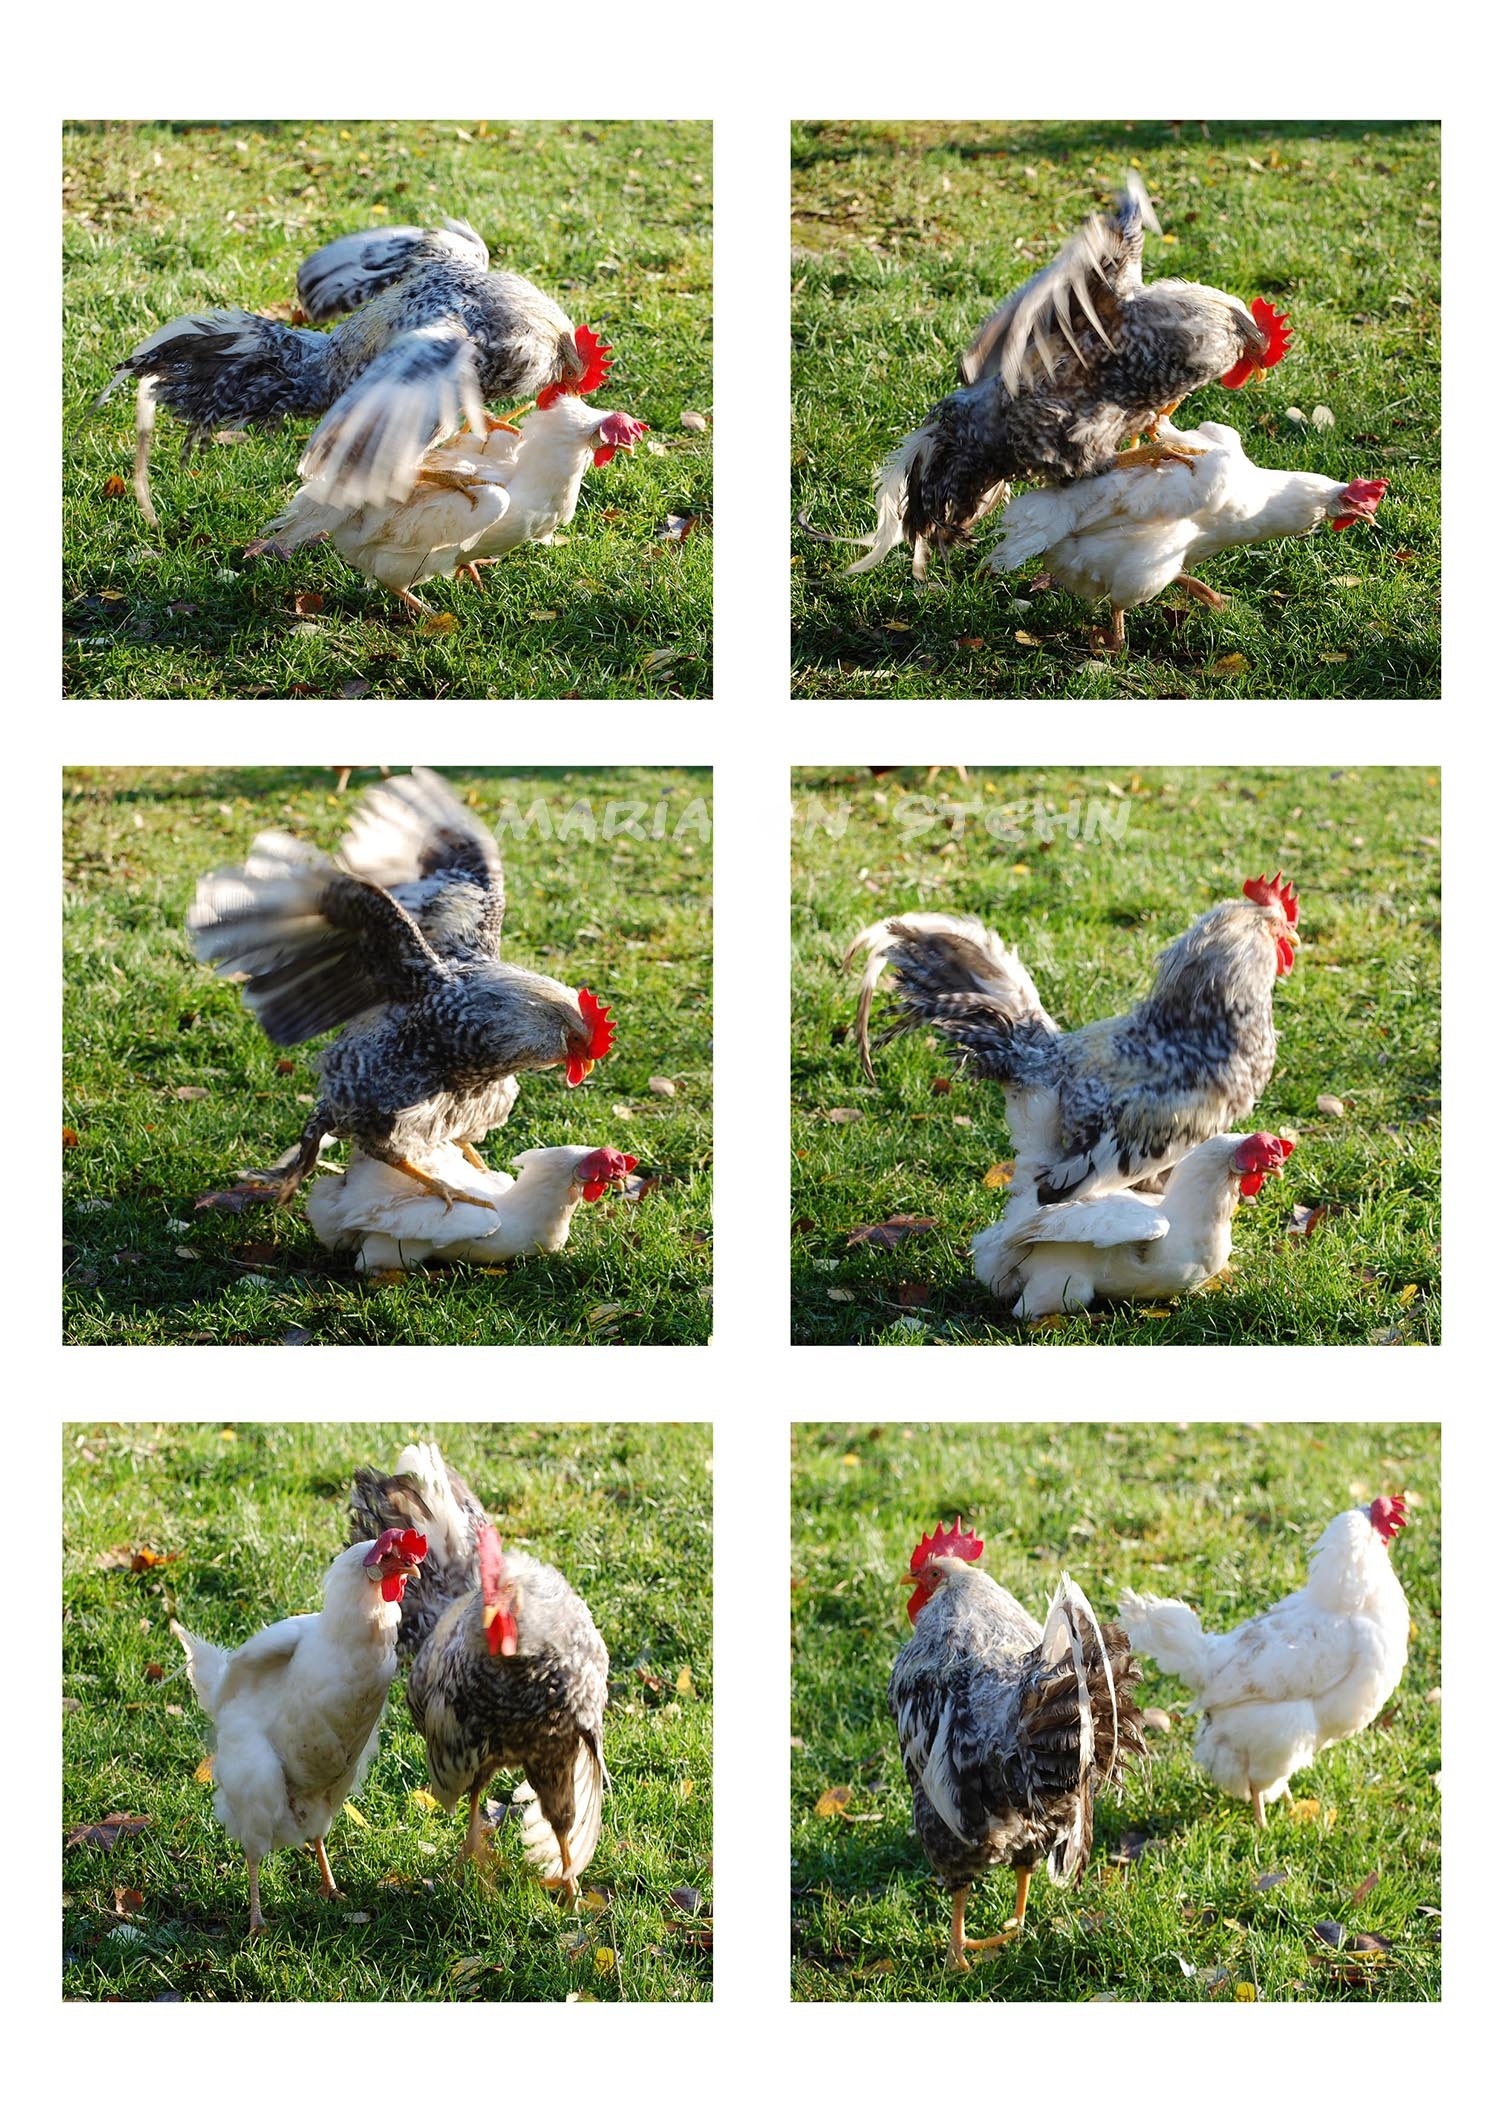 The rooster dance
(On the pictures Alfred and Bettan)